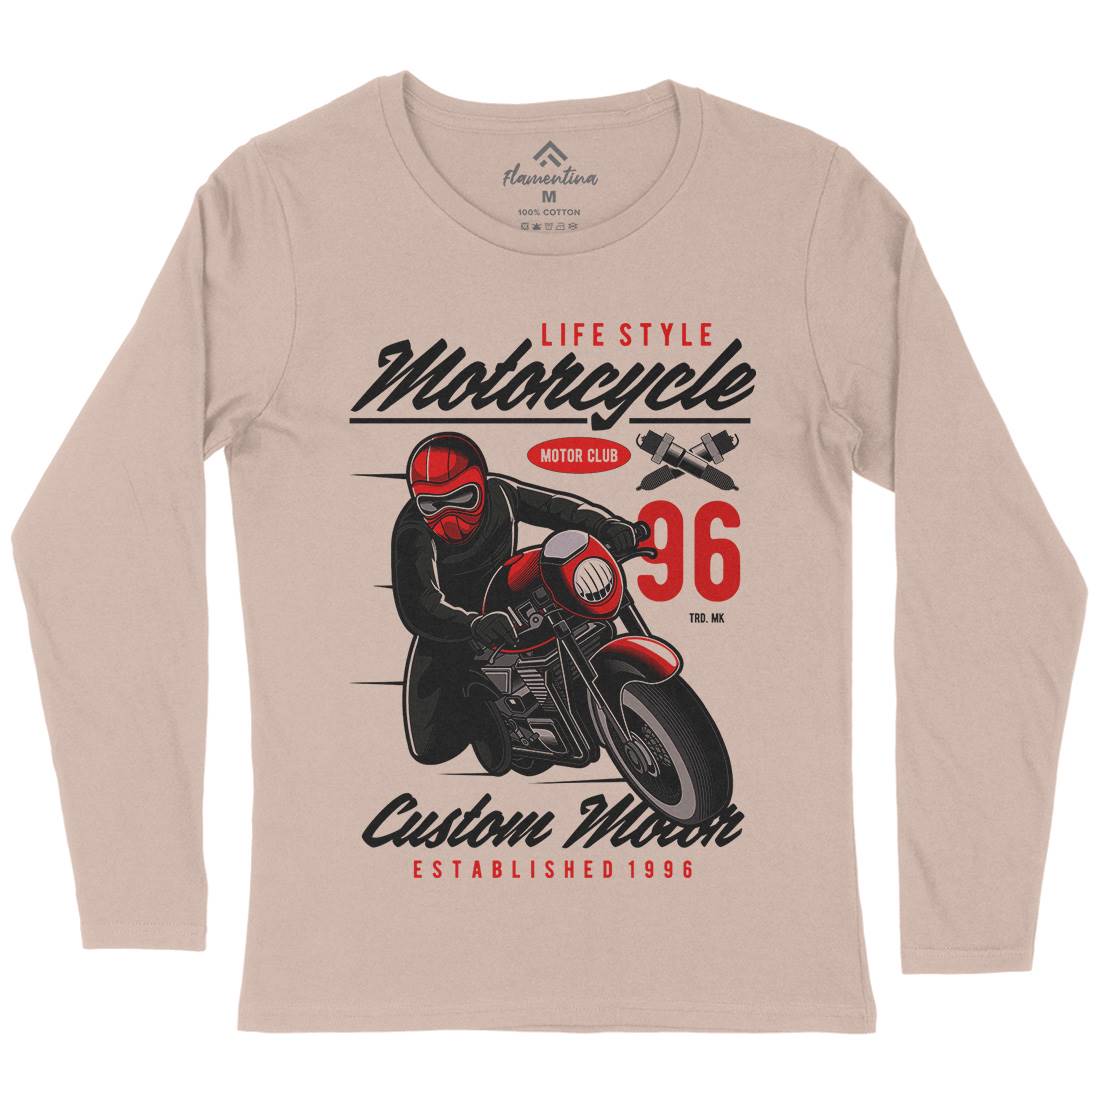 Lifestyle Womens Long Sleeve T-Shirt Motorcycles C399